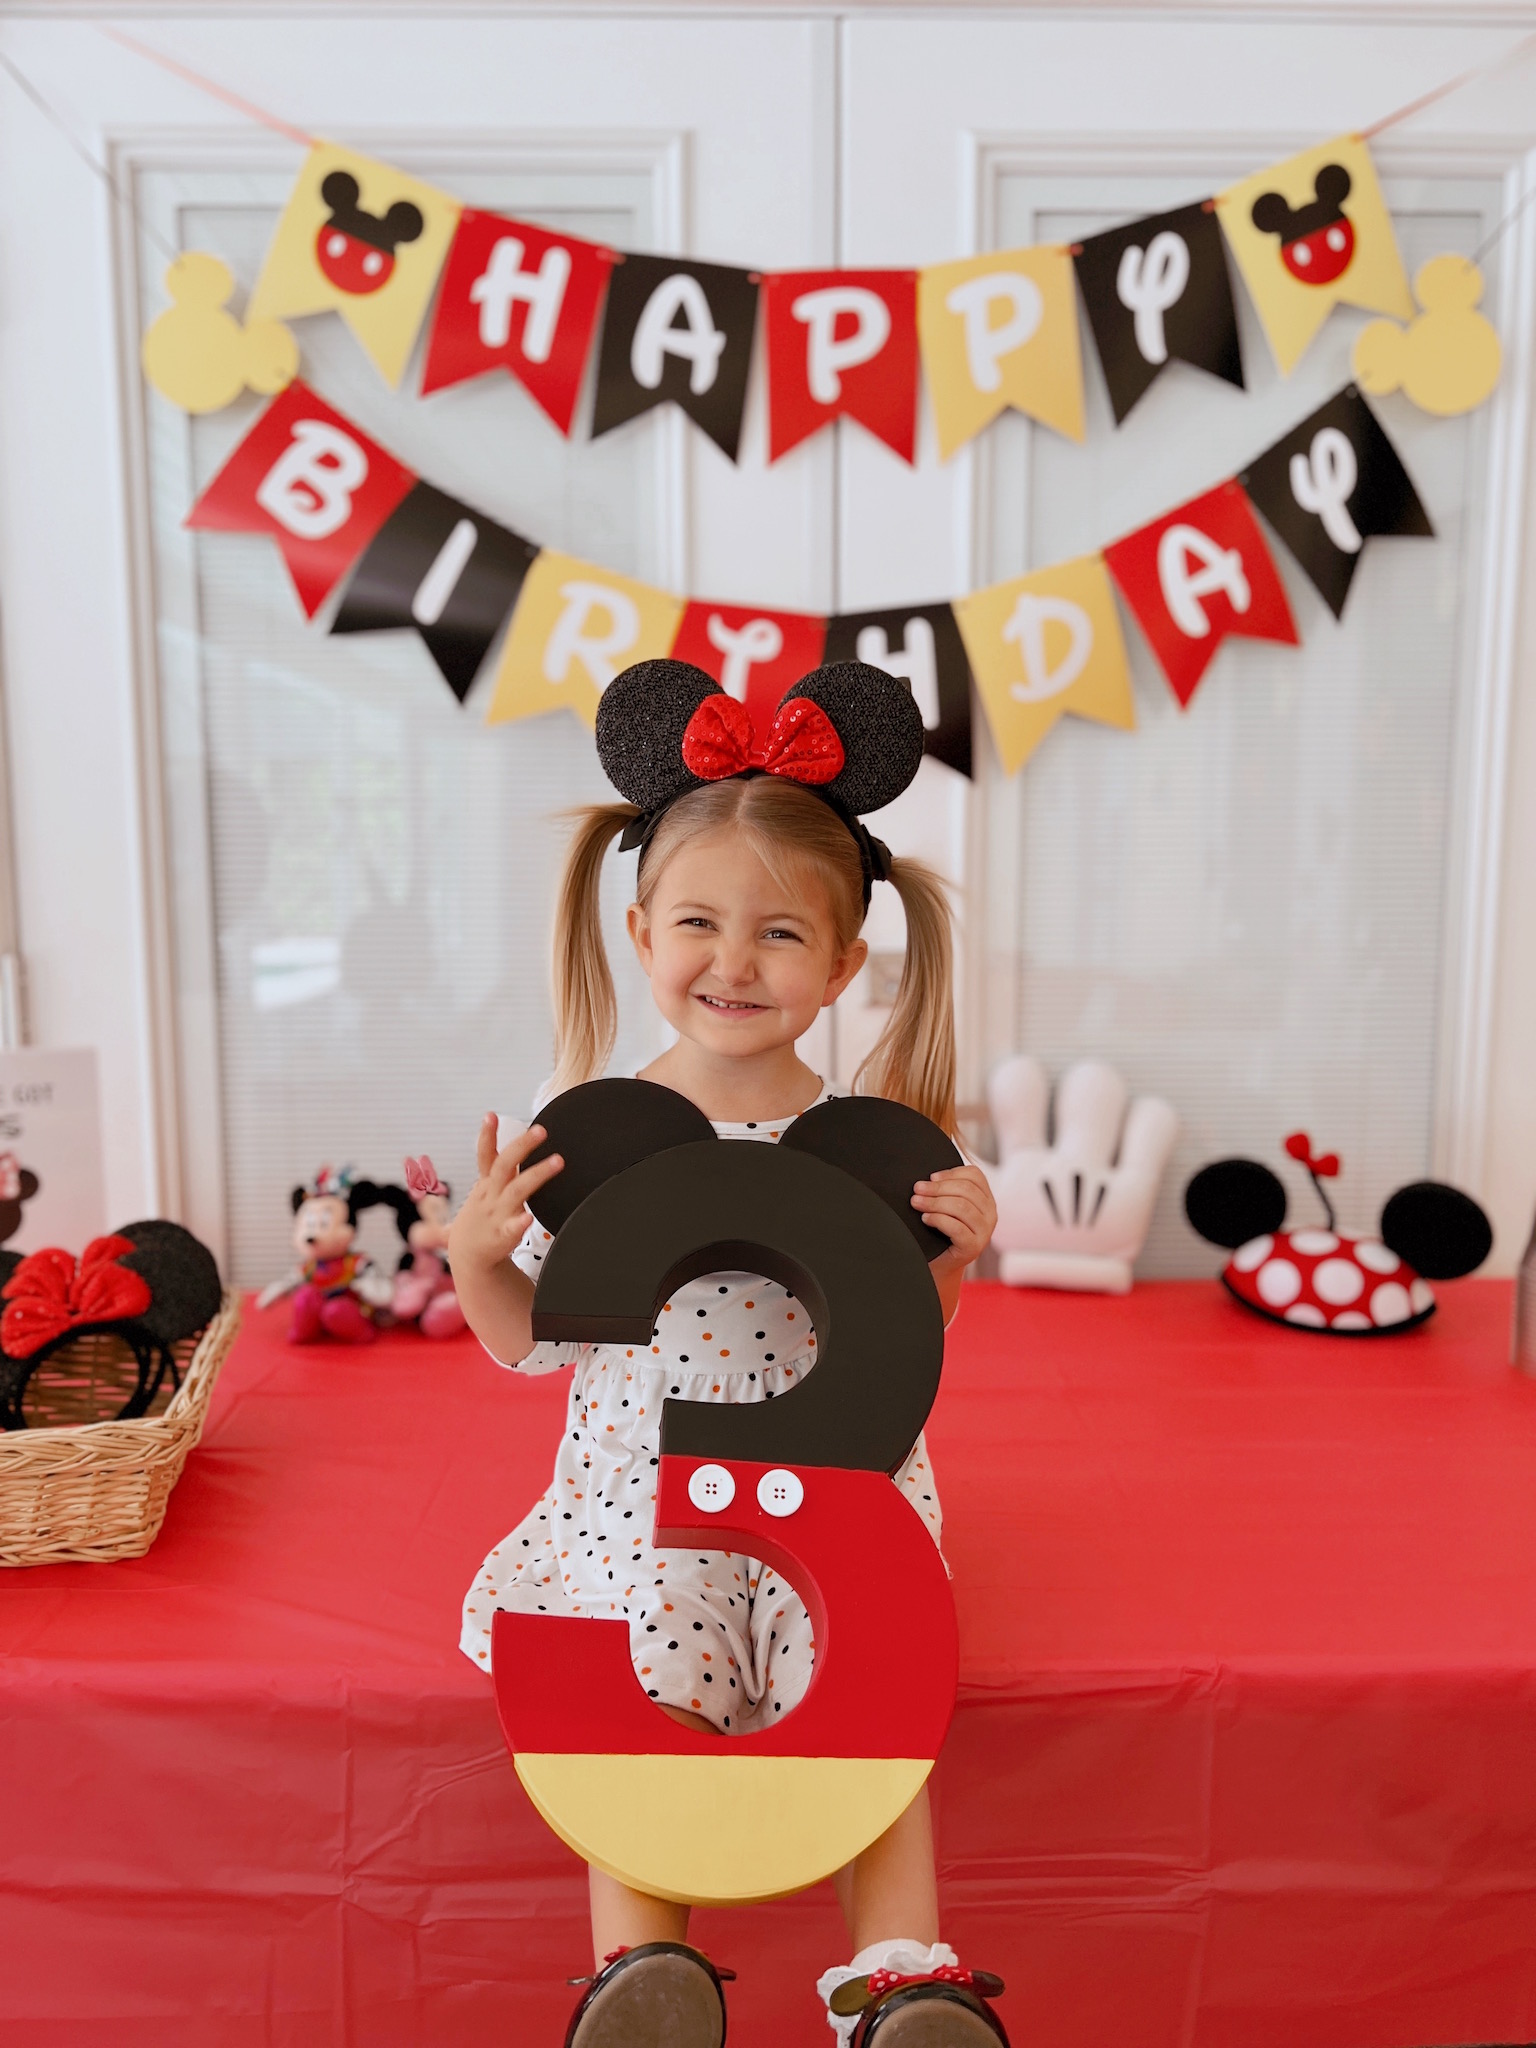 Pepper's Magical "Mickey & Minnie Mouse" 3rd Birthday Pool Party | Creative ideas for hosting a magical Mickey & Minnie themed birthday bash for your little Mouseketeer with do-able decor, punny snacks, and party games that are fun for all ages! via thinkingcloset.com